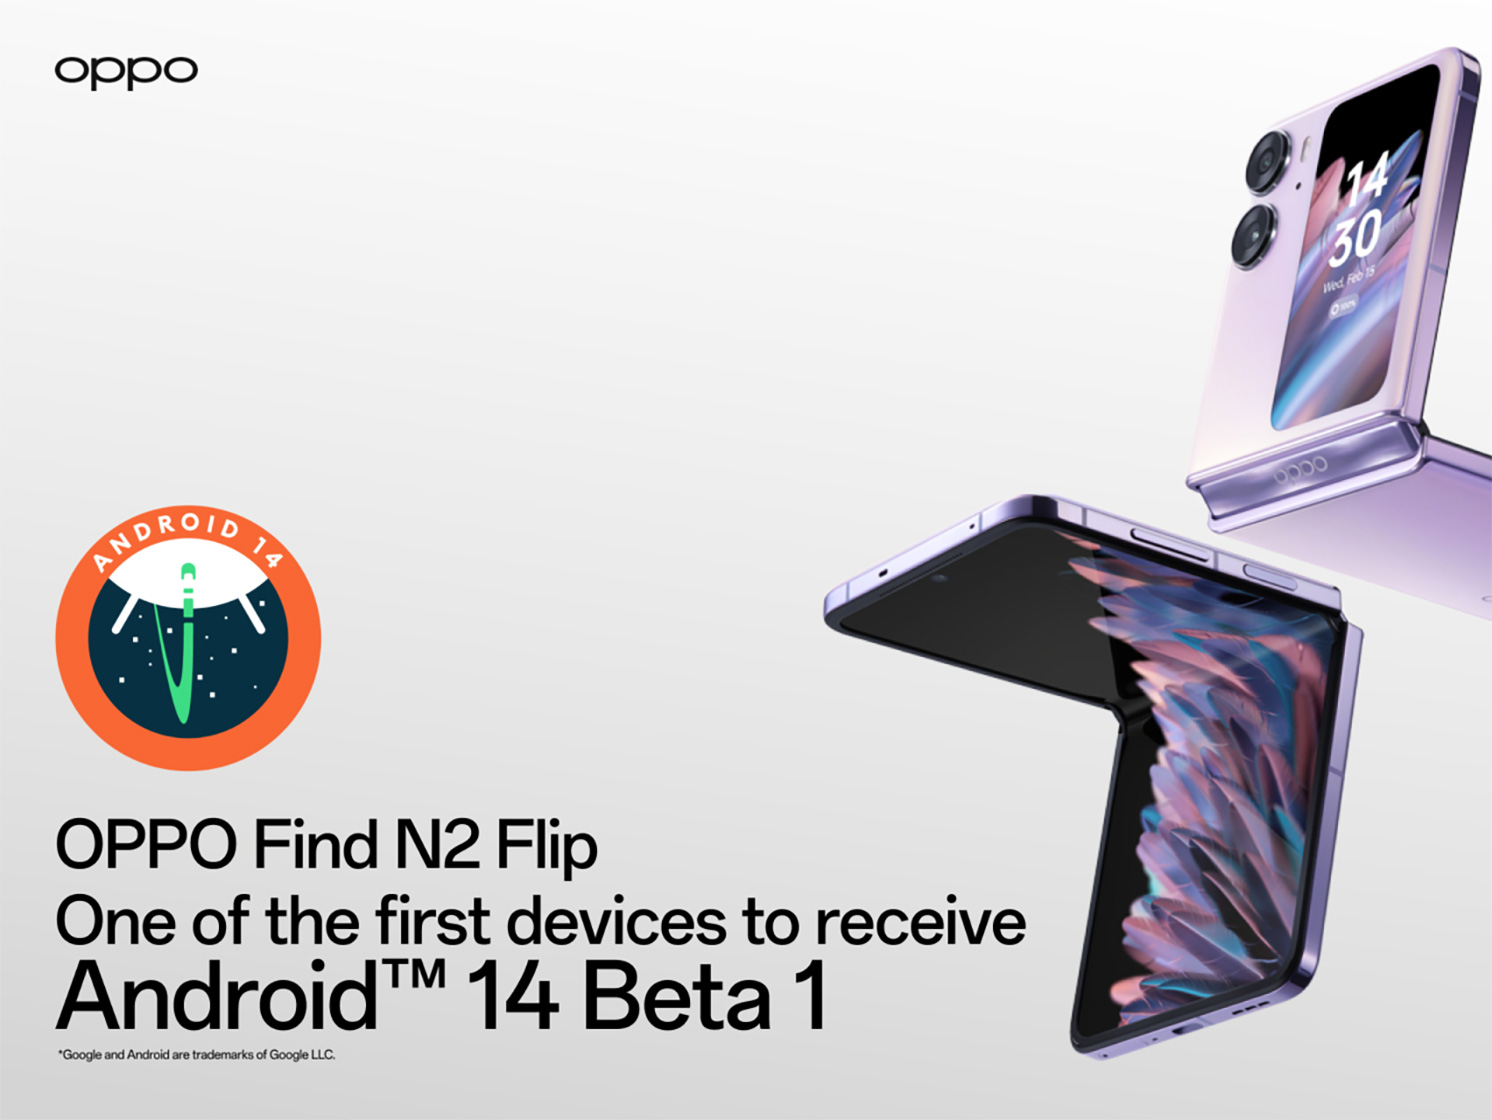 OPPO Find N2 Flip Will Be One of the First Devices to Receive the Android  14 Beta 1 Update